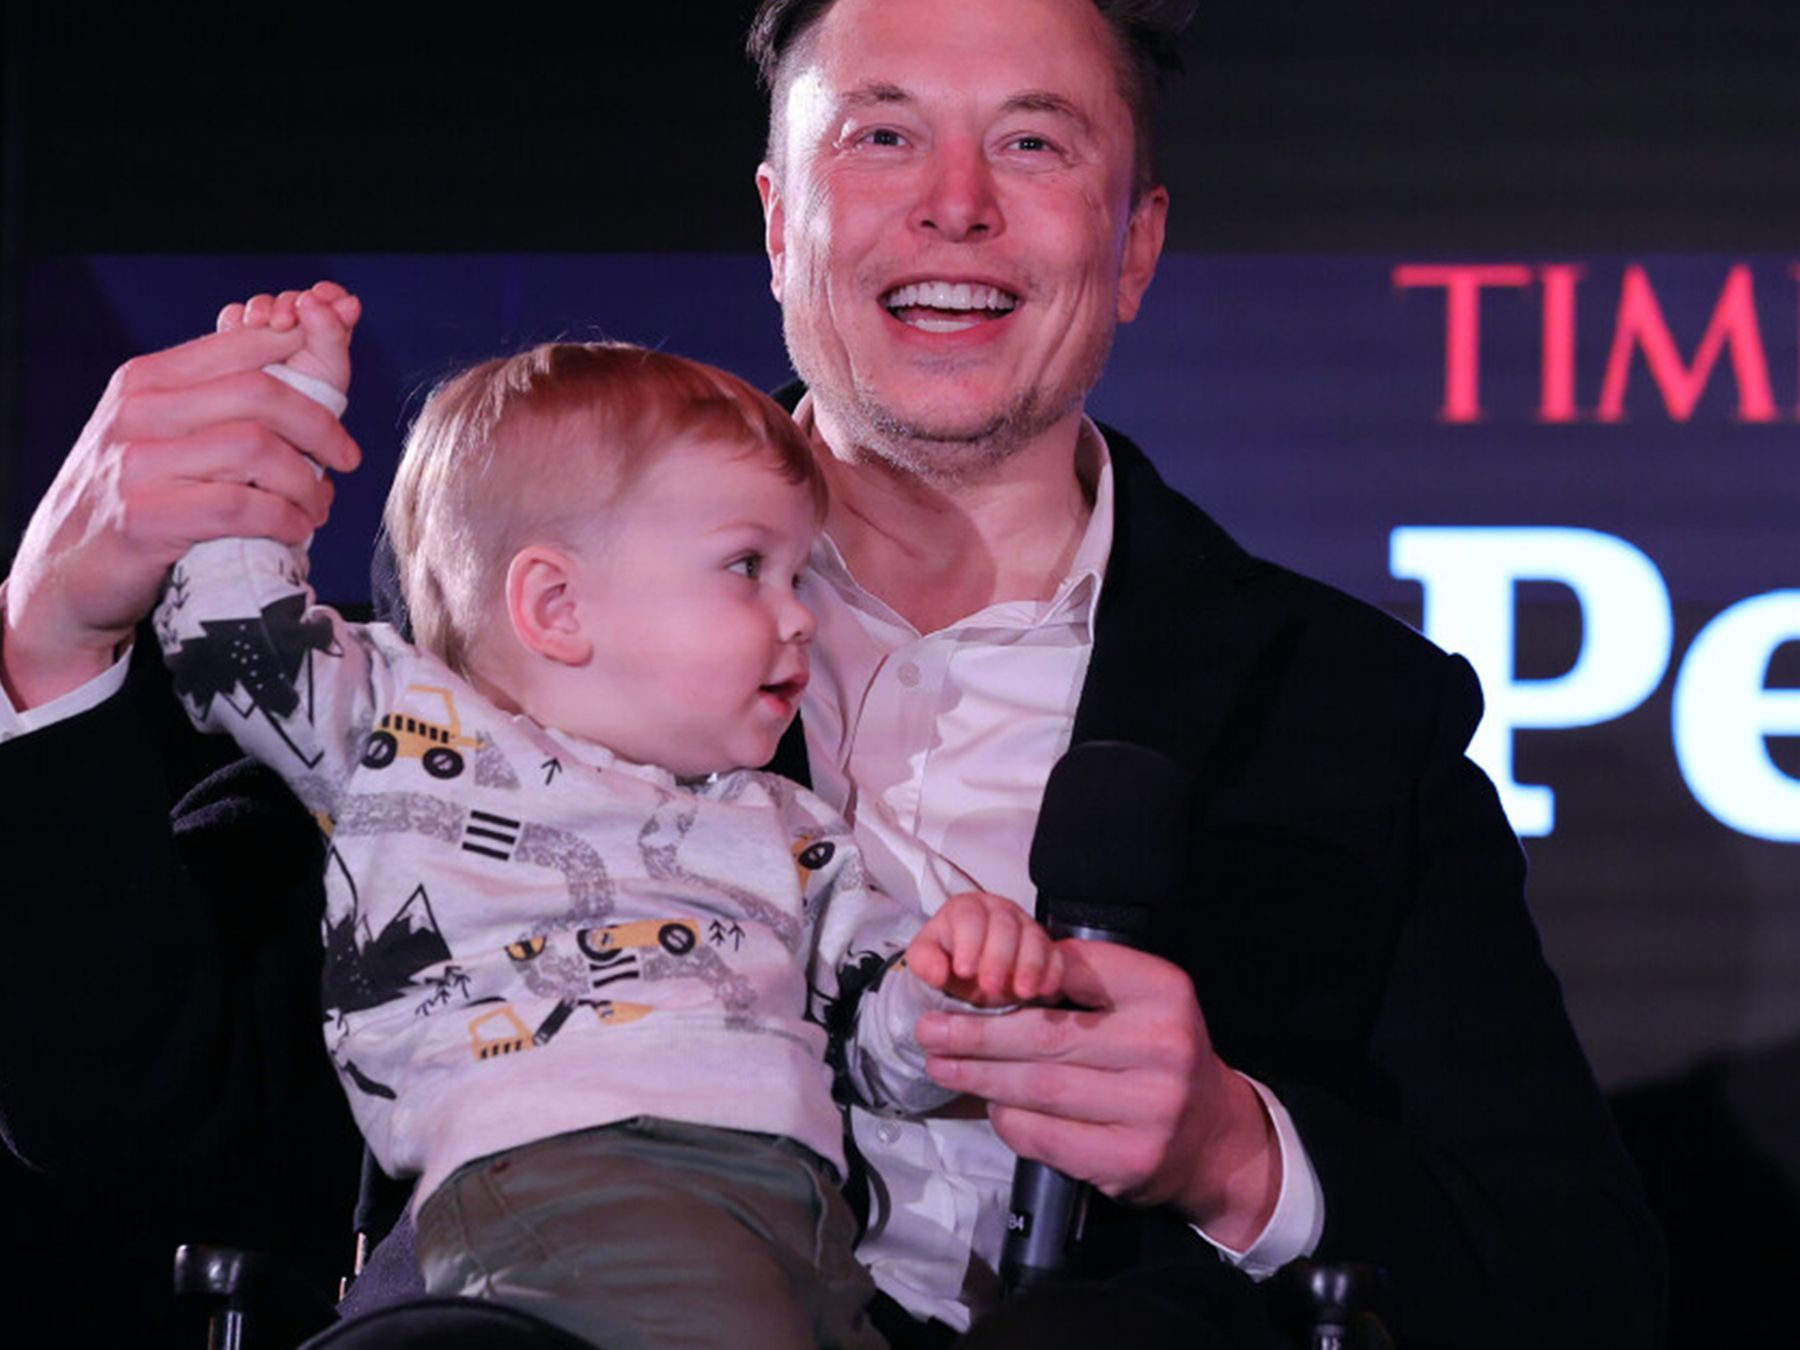 The new push for more babies: How tech elites think it will save the planet